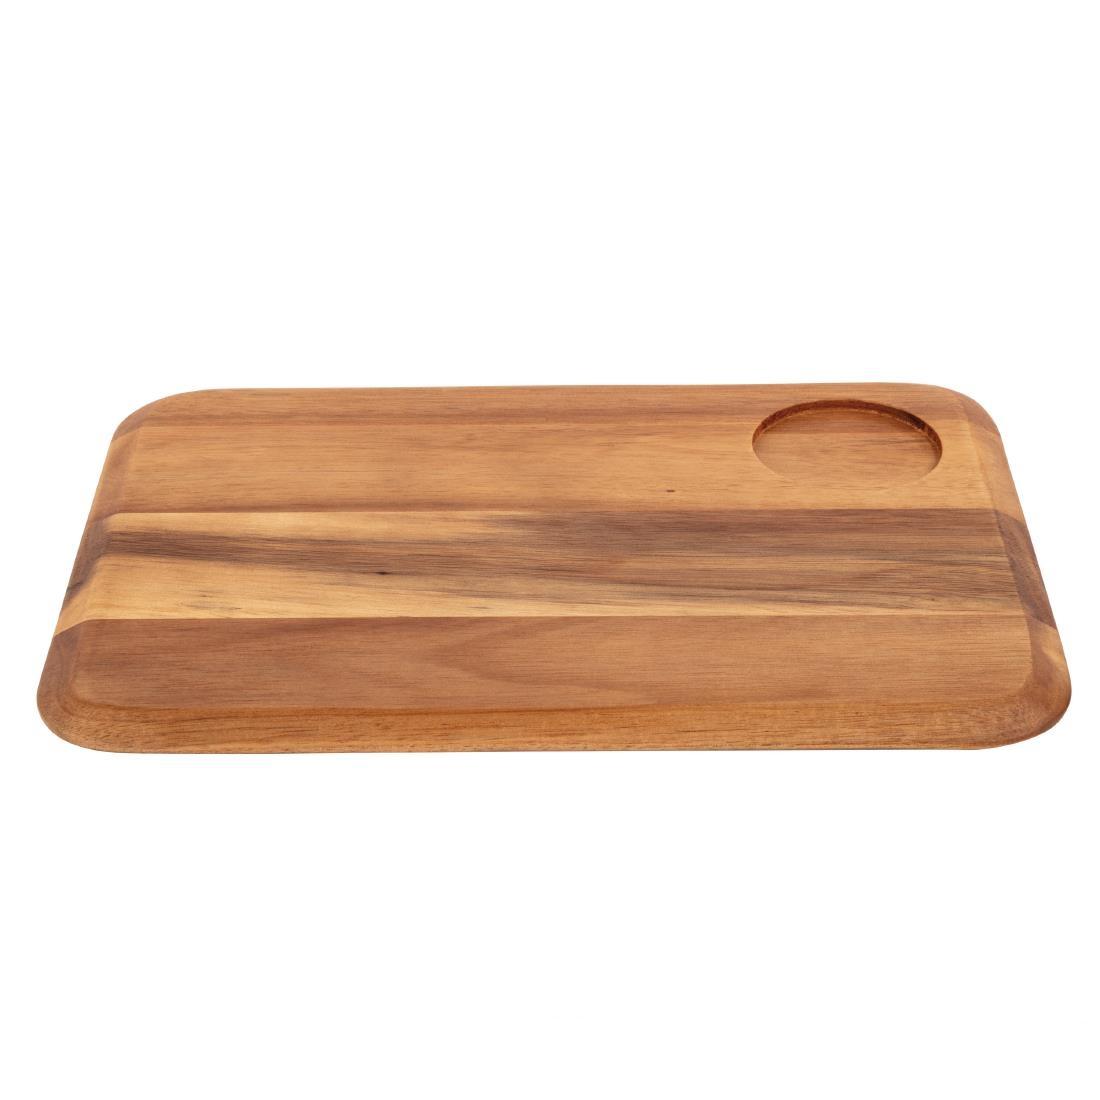 Rounded Acacia Wooden Serving Board - DP156  - 2